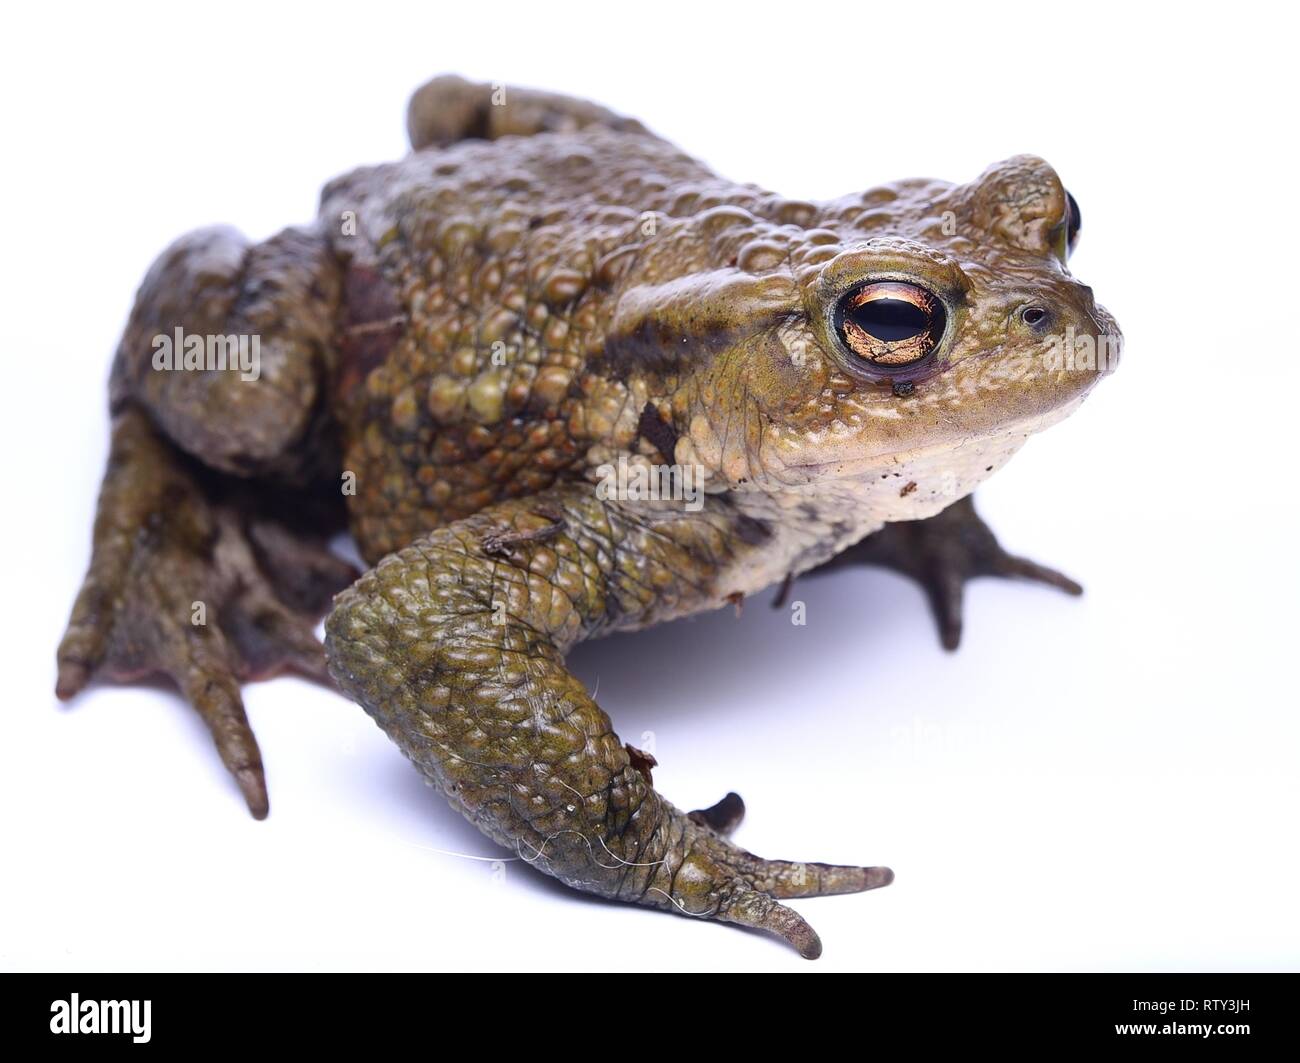 Crapaud commun (Bufo bufo ) Banque D'Images